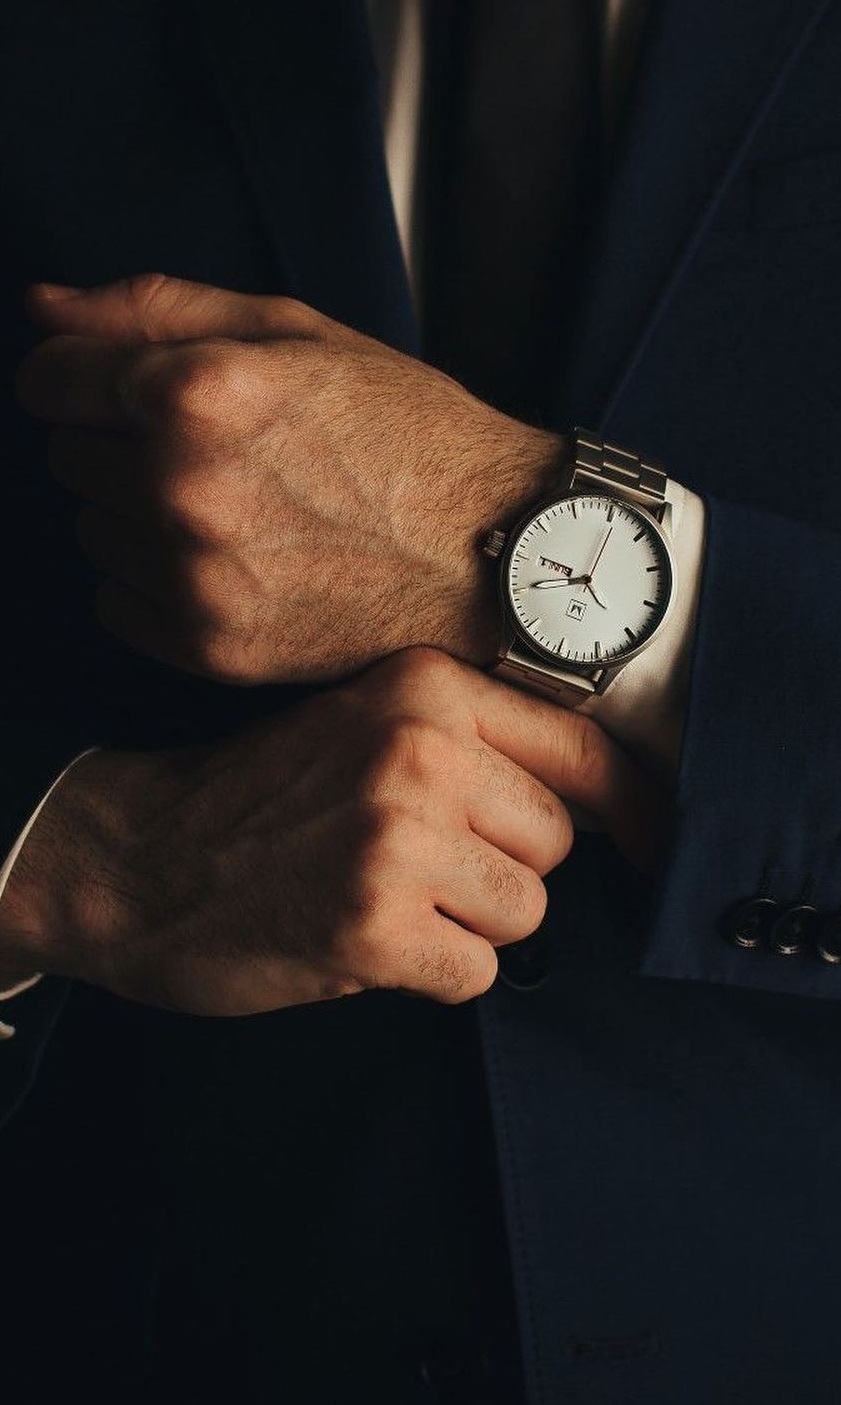 Watches - the best styling accessory for men